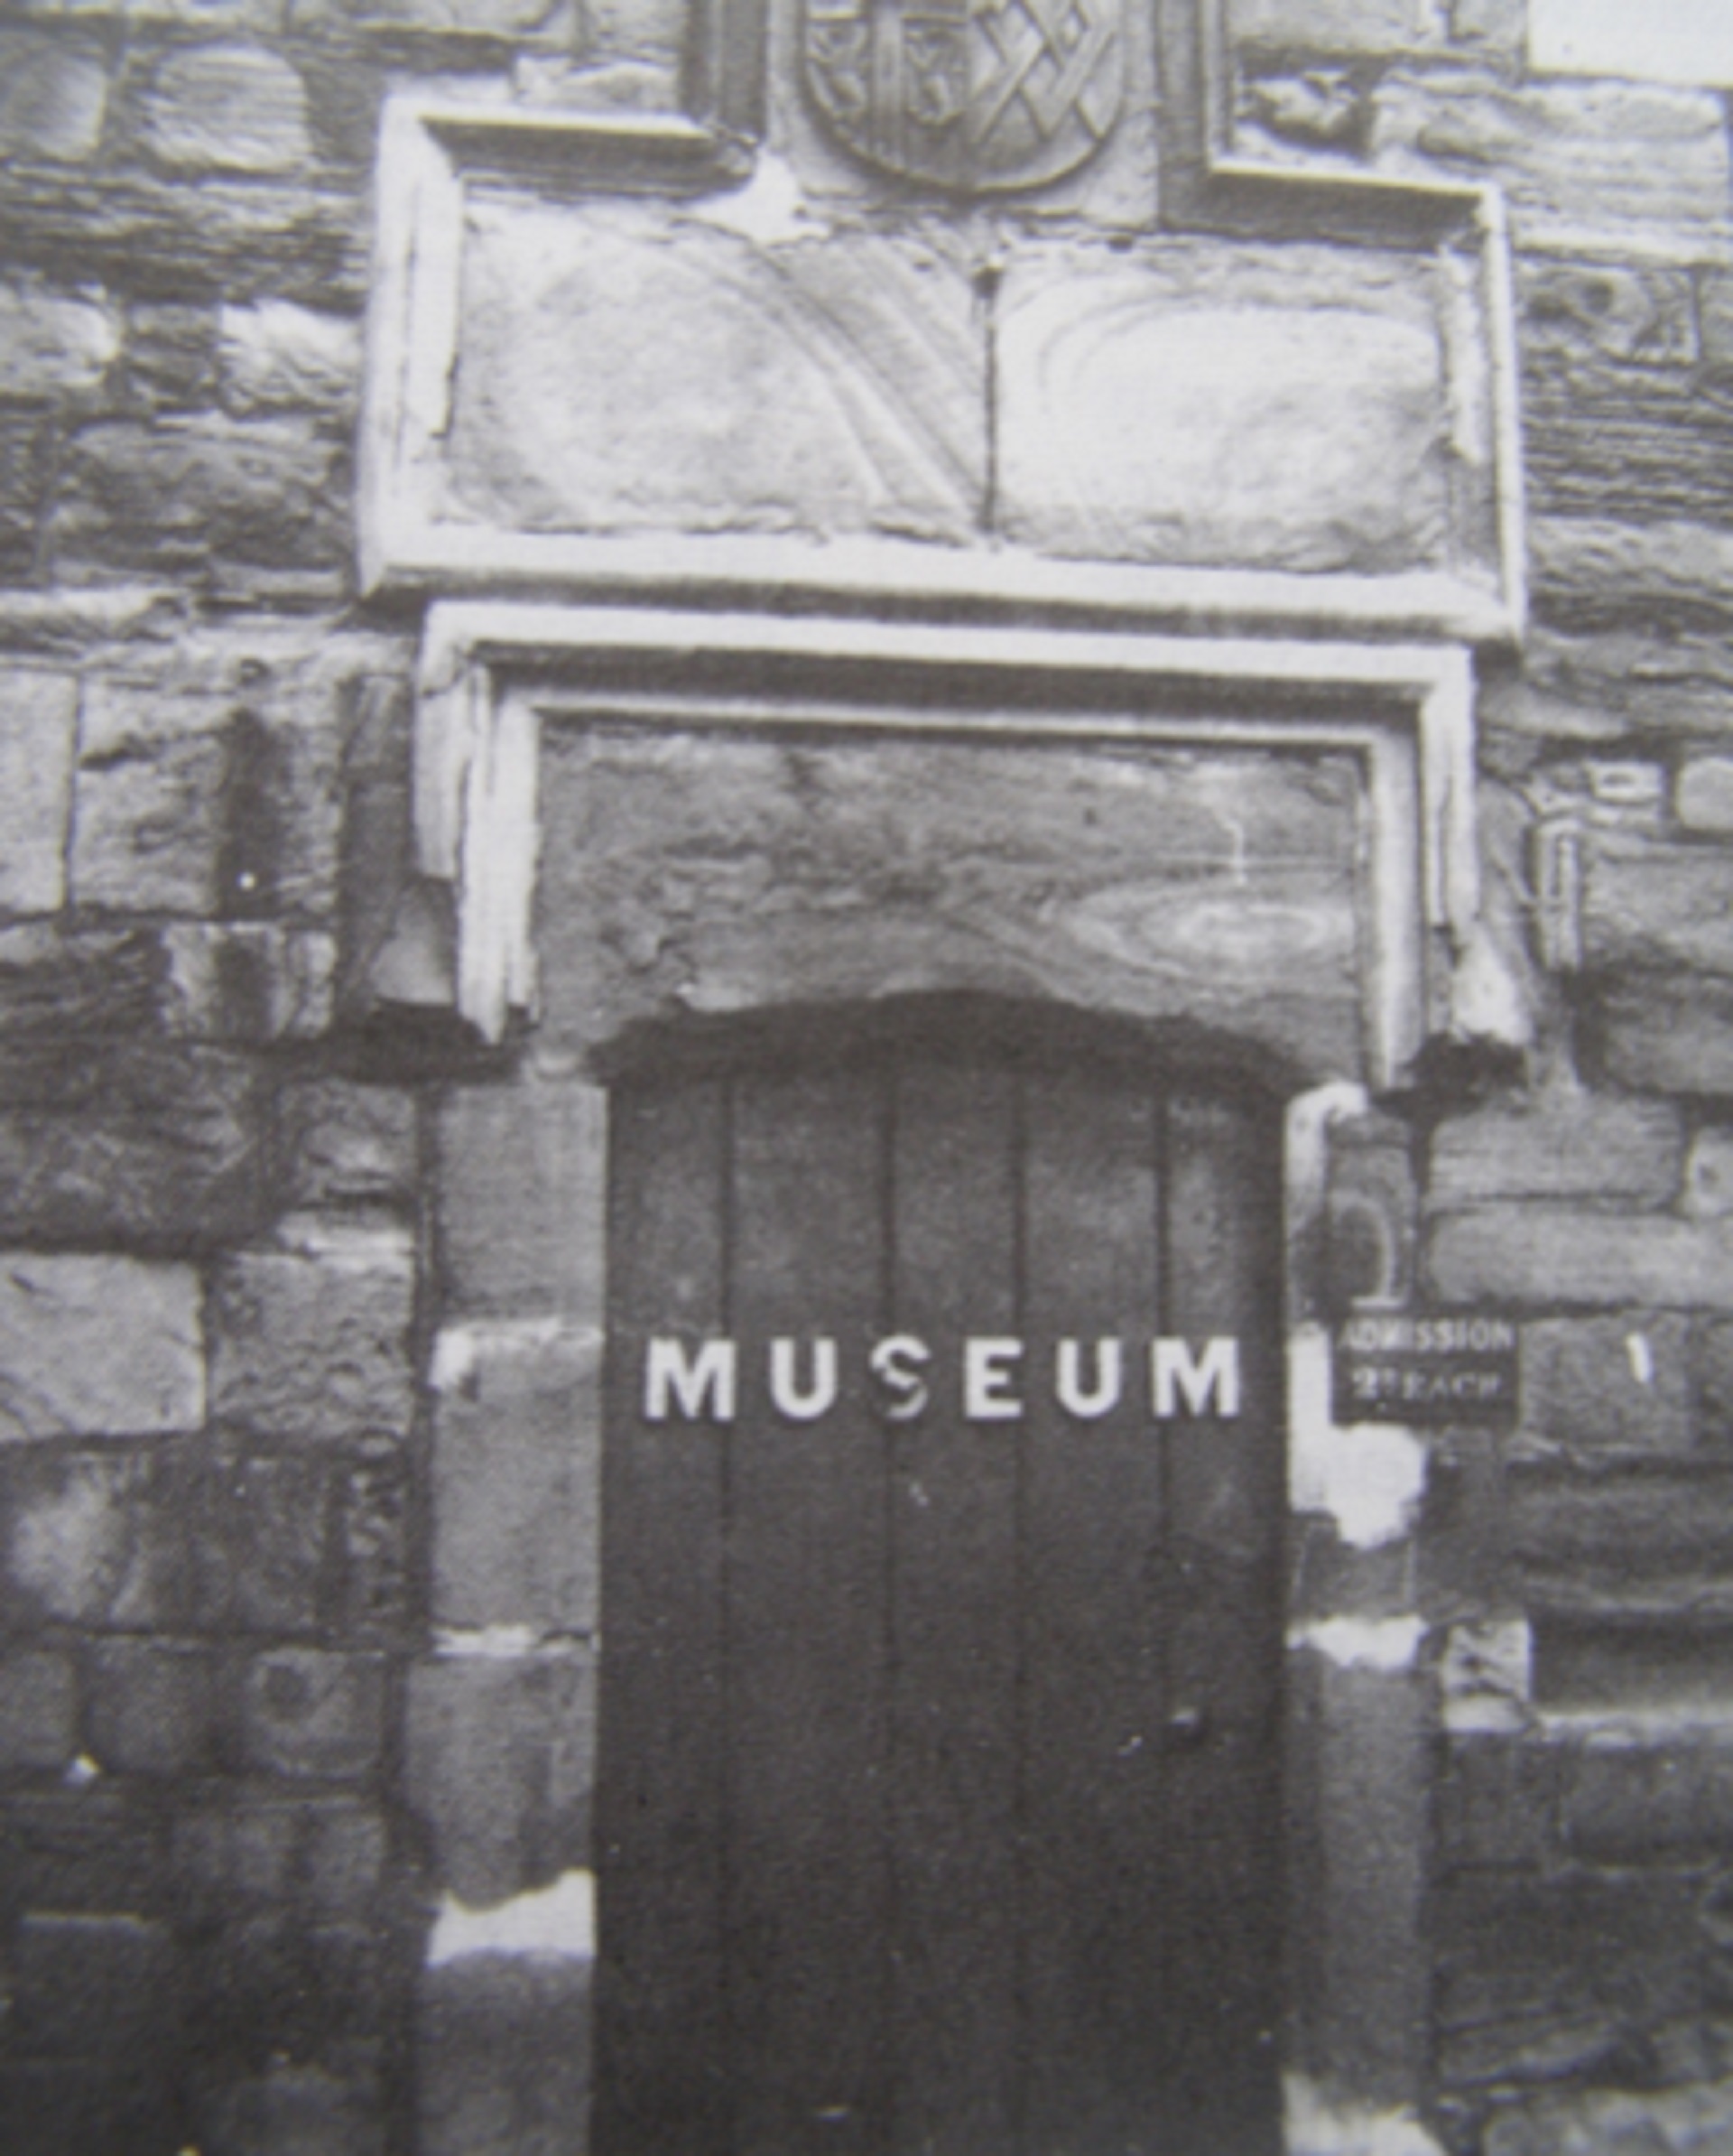 Black and white photograph with a door at the centre, and the word Museum written on it.